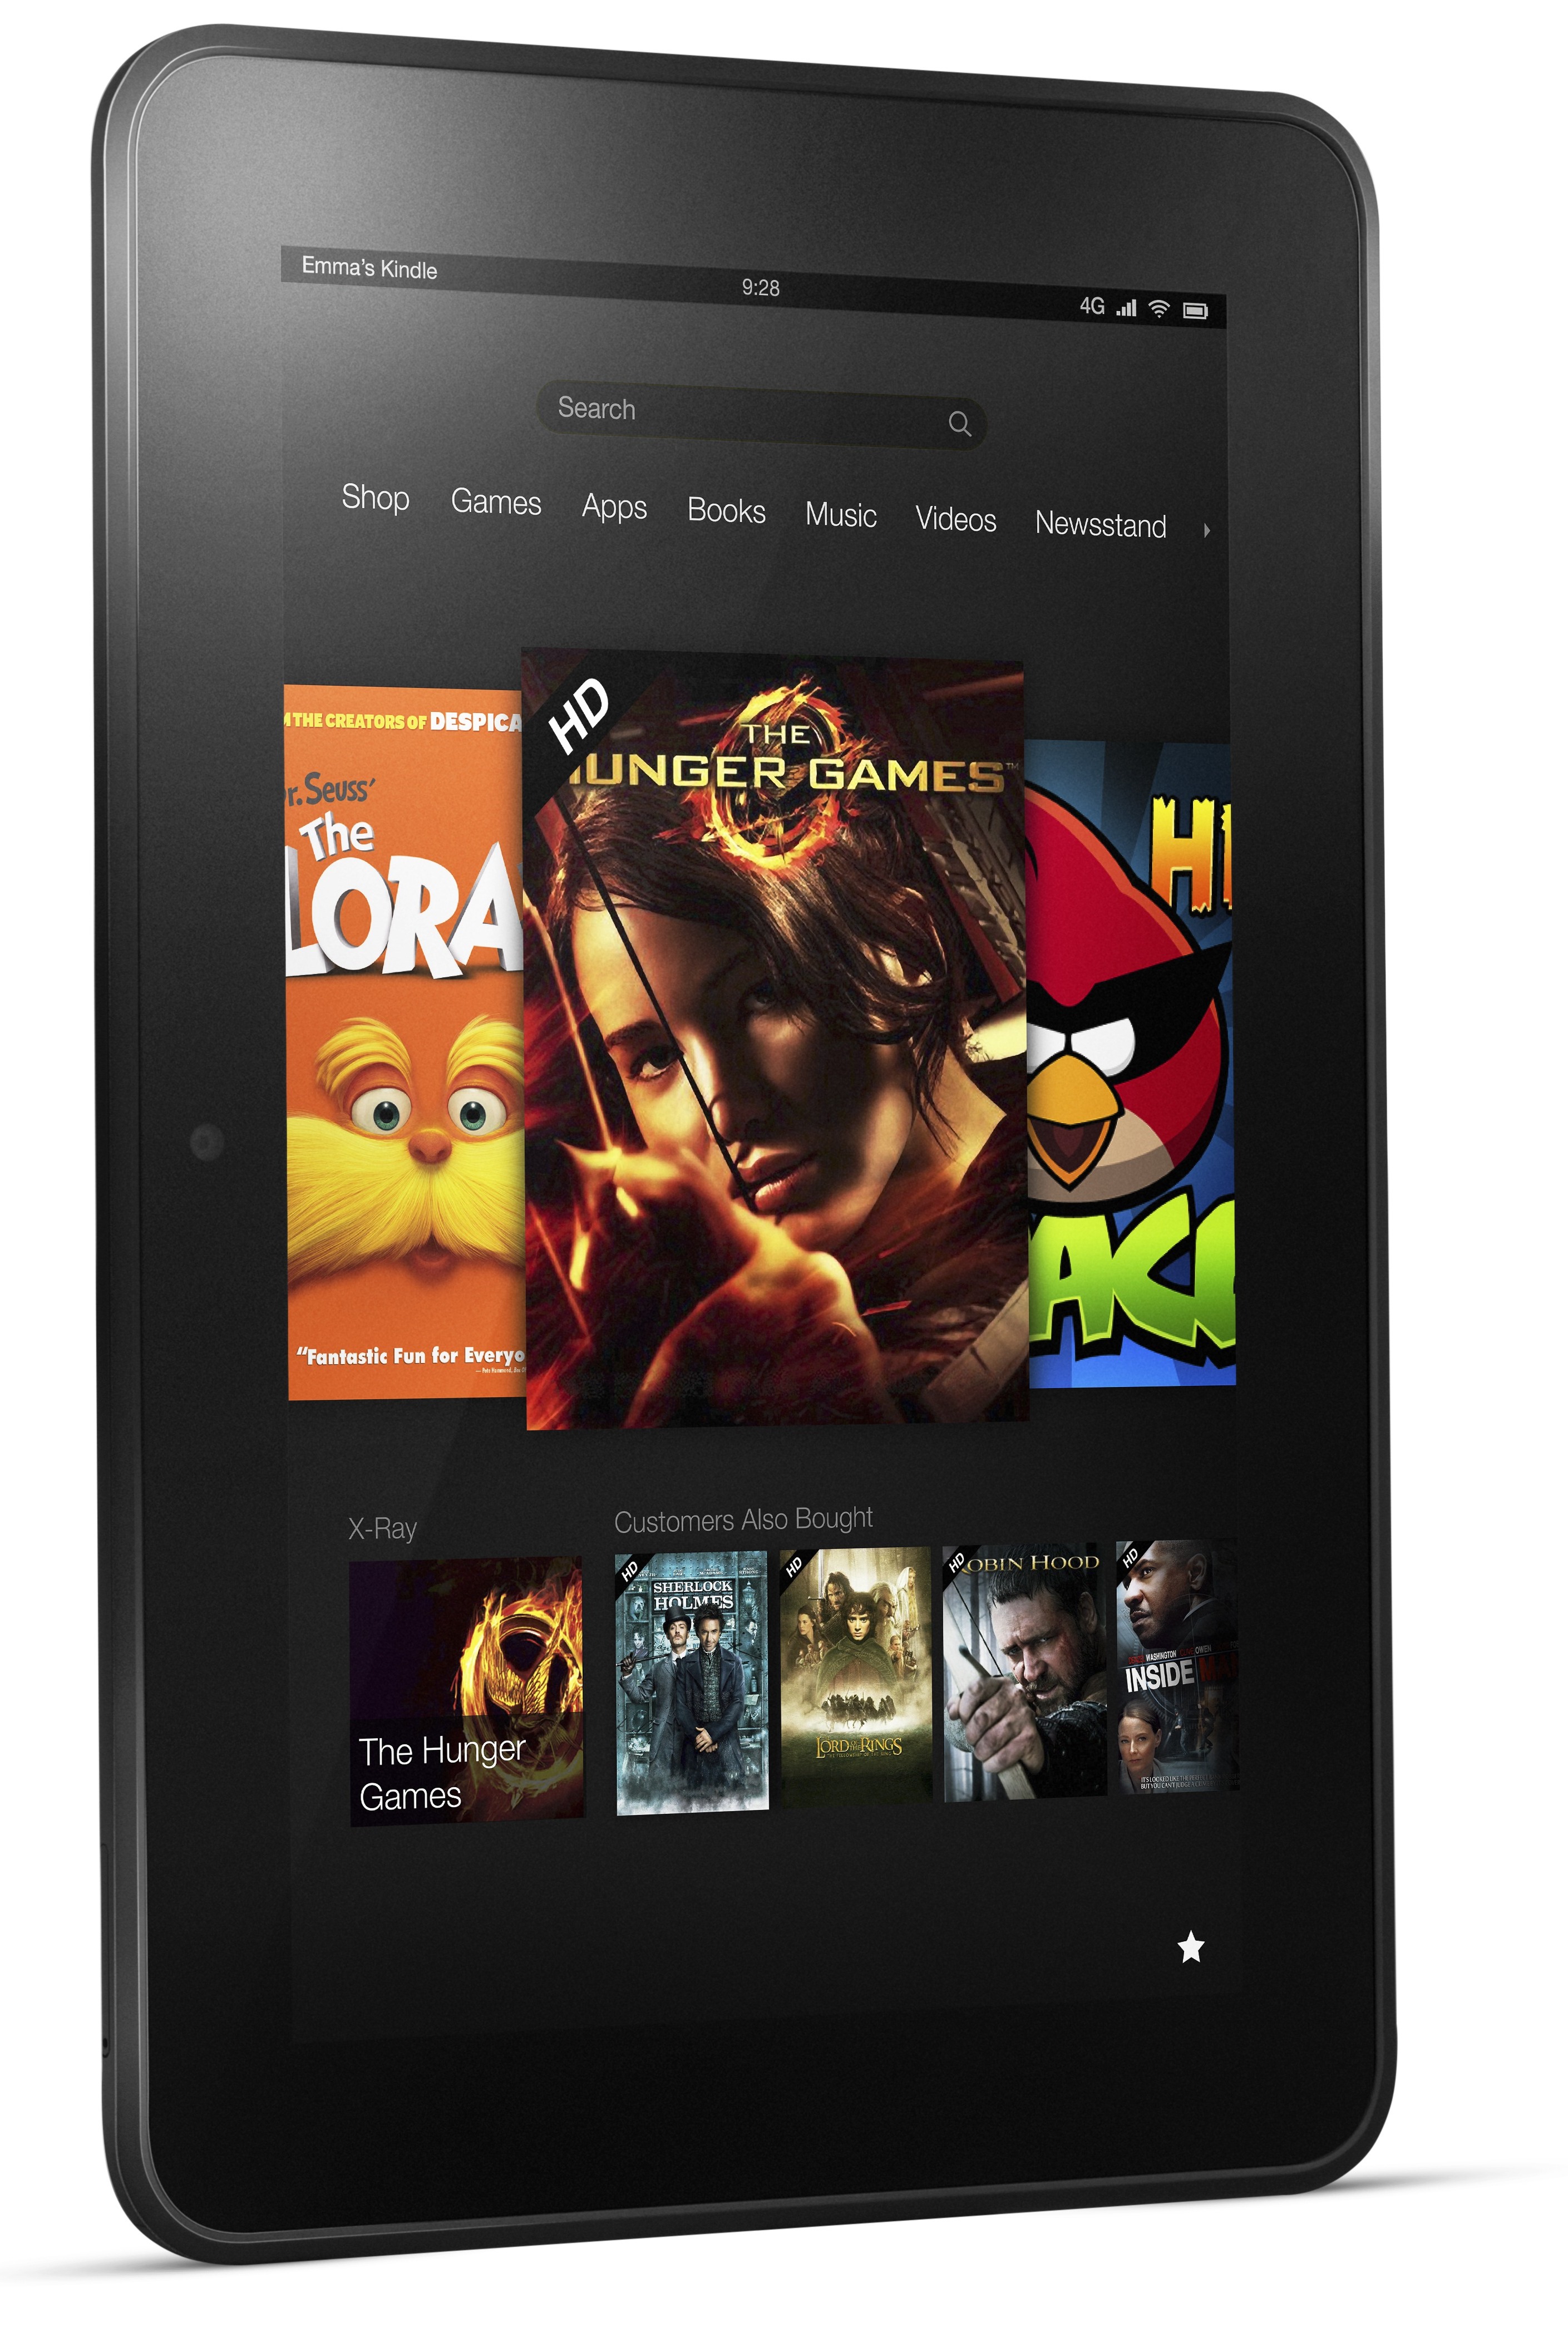 Amazon Kindle Fire Hd 89 4g Lte Atandt Full Specs And Price Details